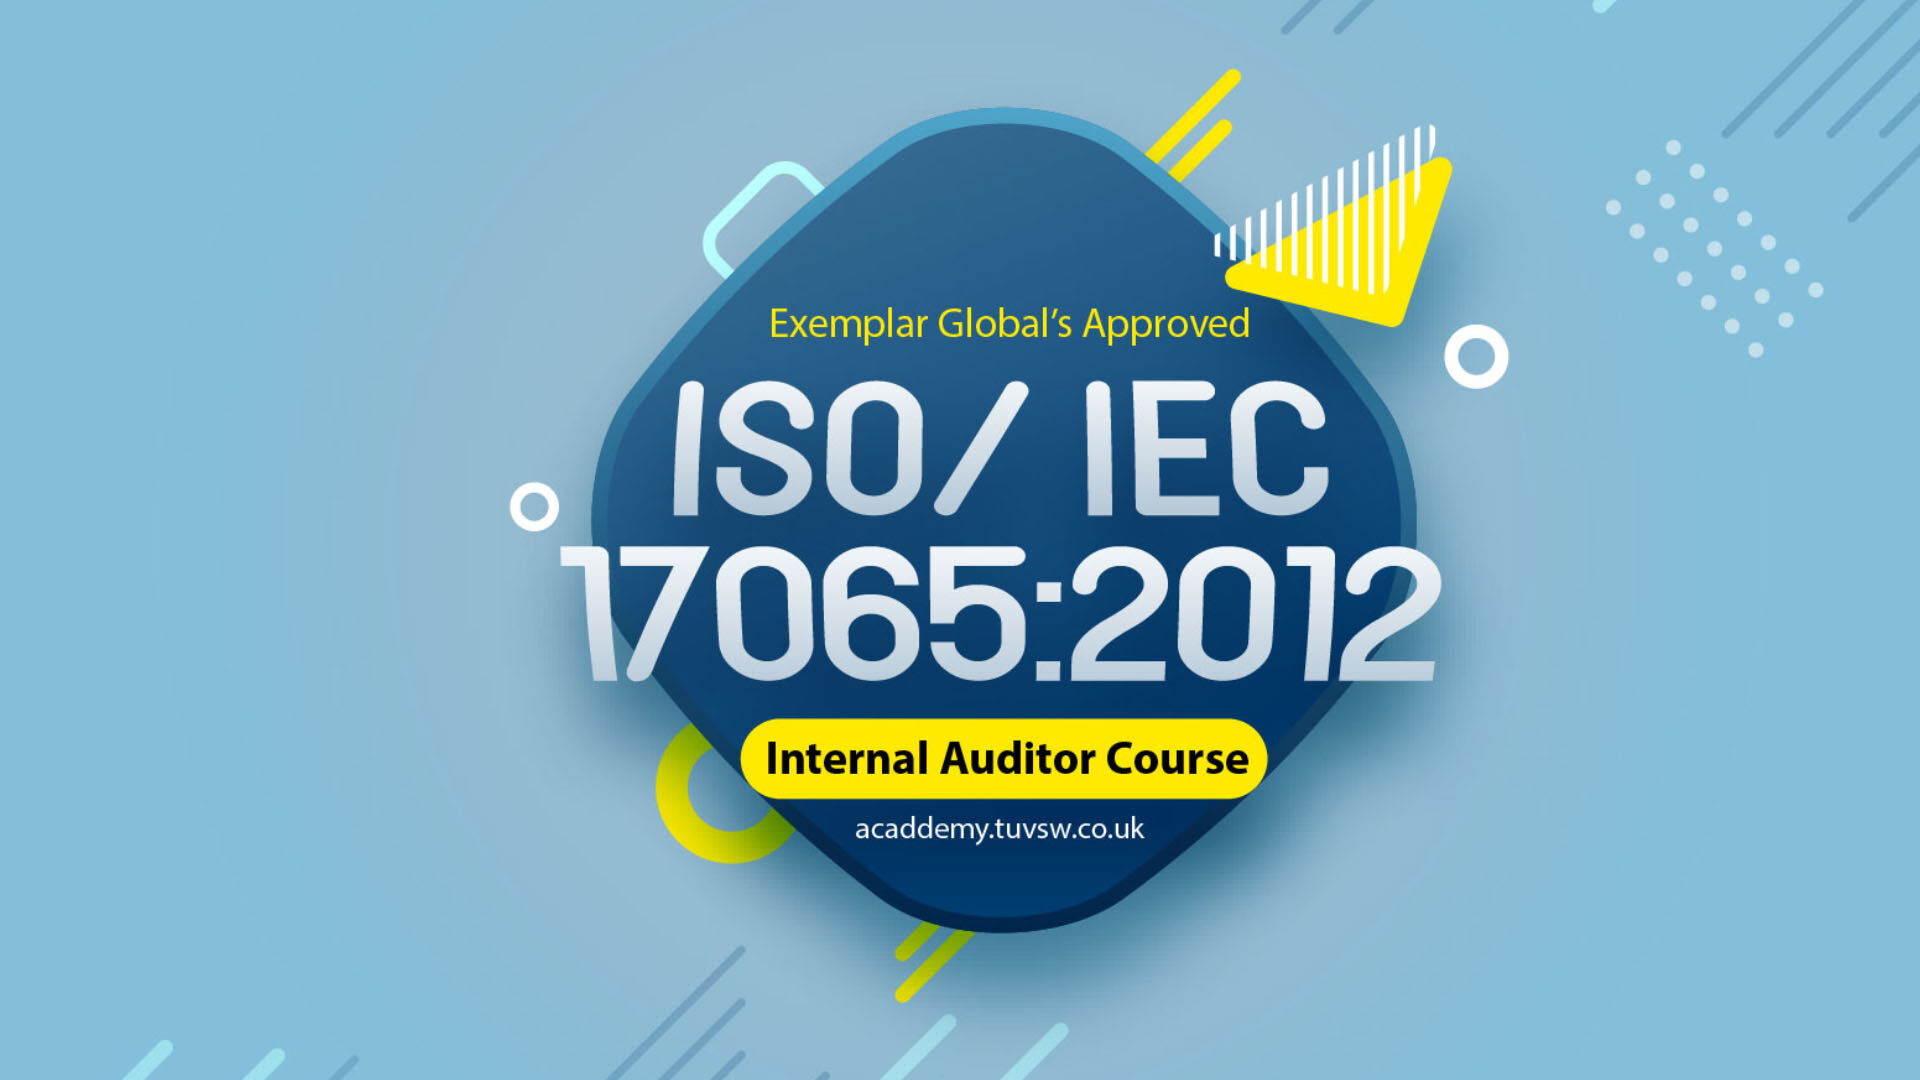 ISO/IEC 17065:2012 Internal Auditor Training Course